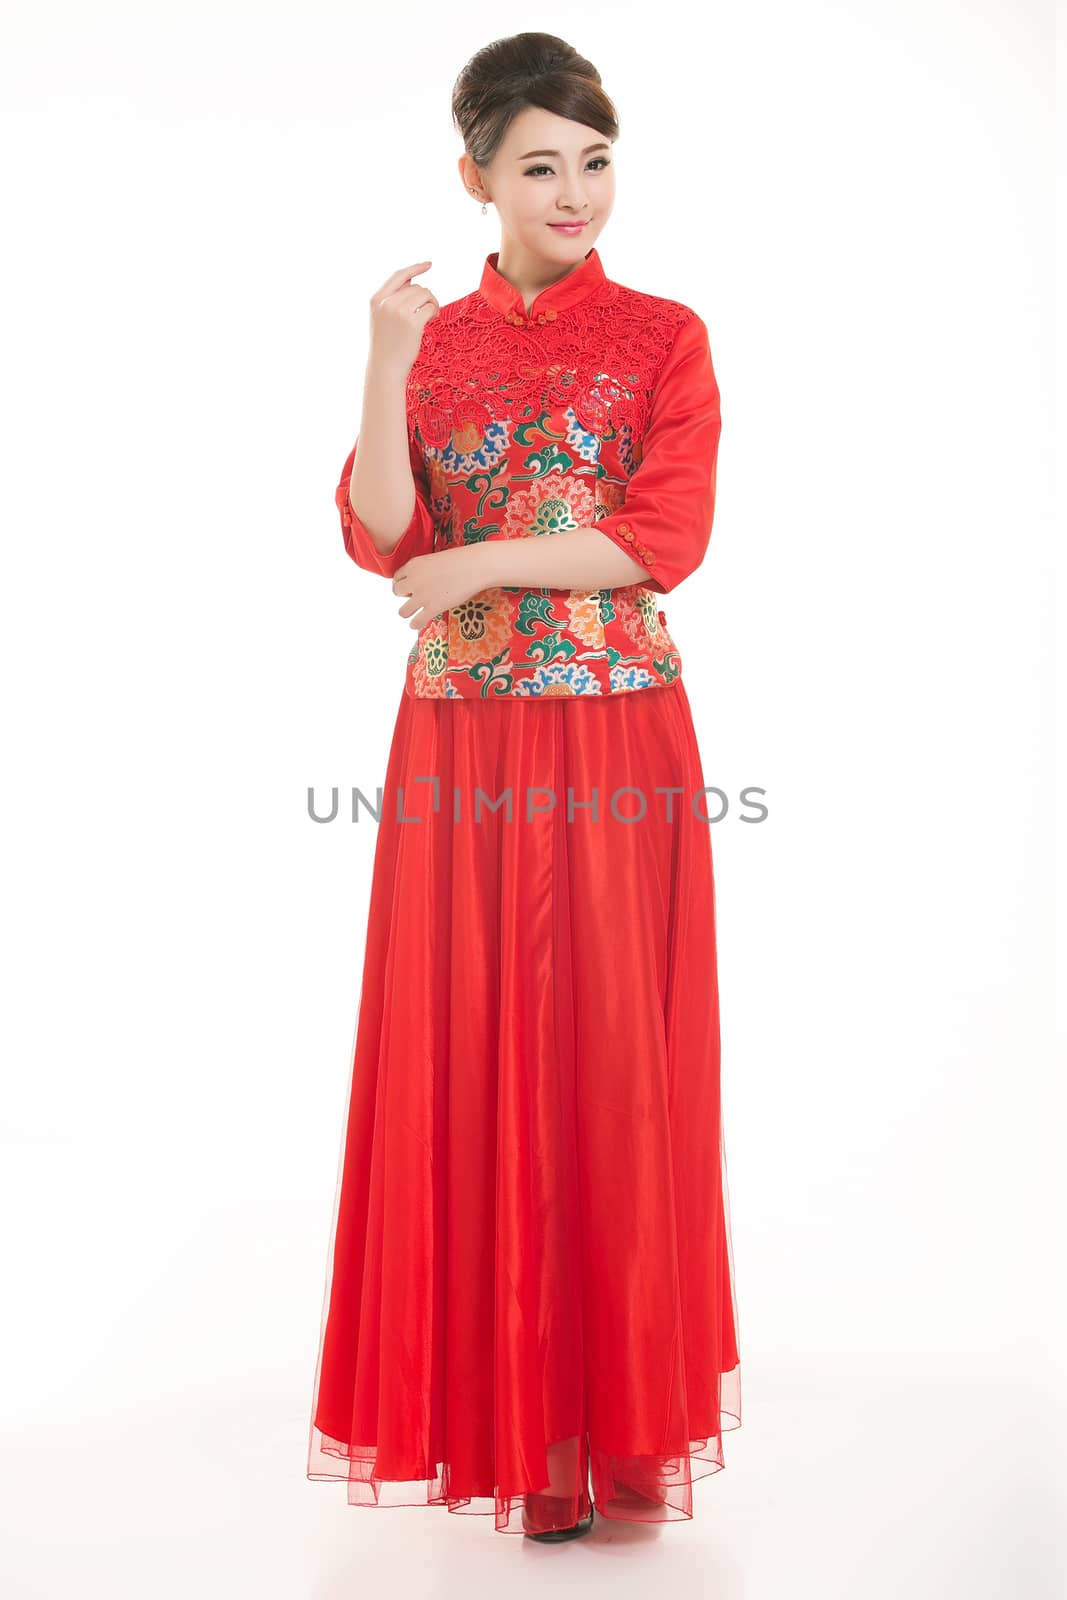 Wearing Chinese clothing waiter in front of a white background by quweichang